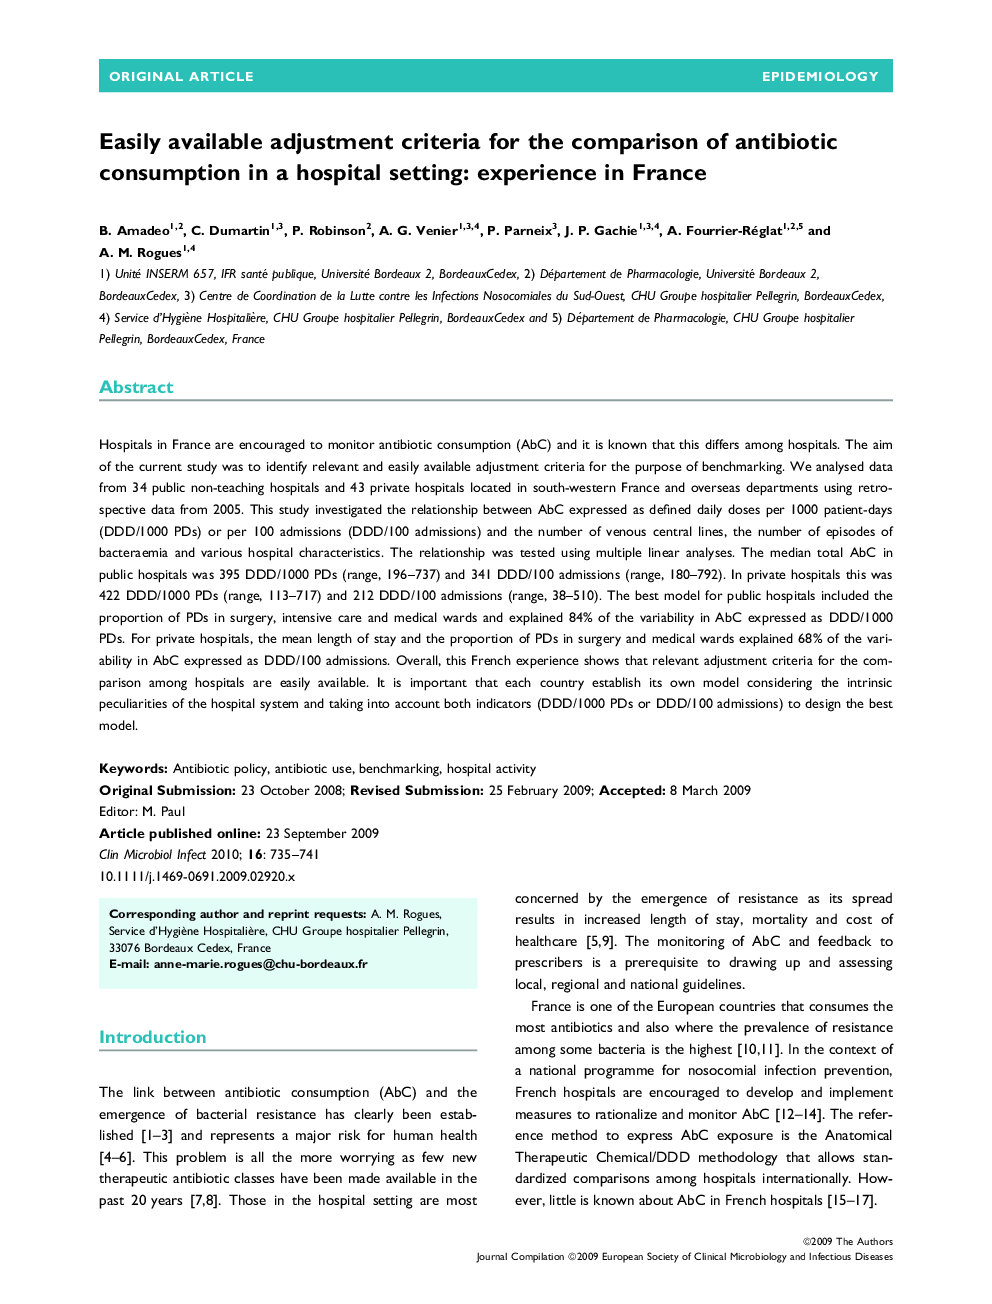 Easily available adjustment criteria for the comparison of antibiotic consumption in a hospital setting: experience in France 